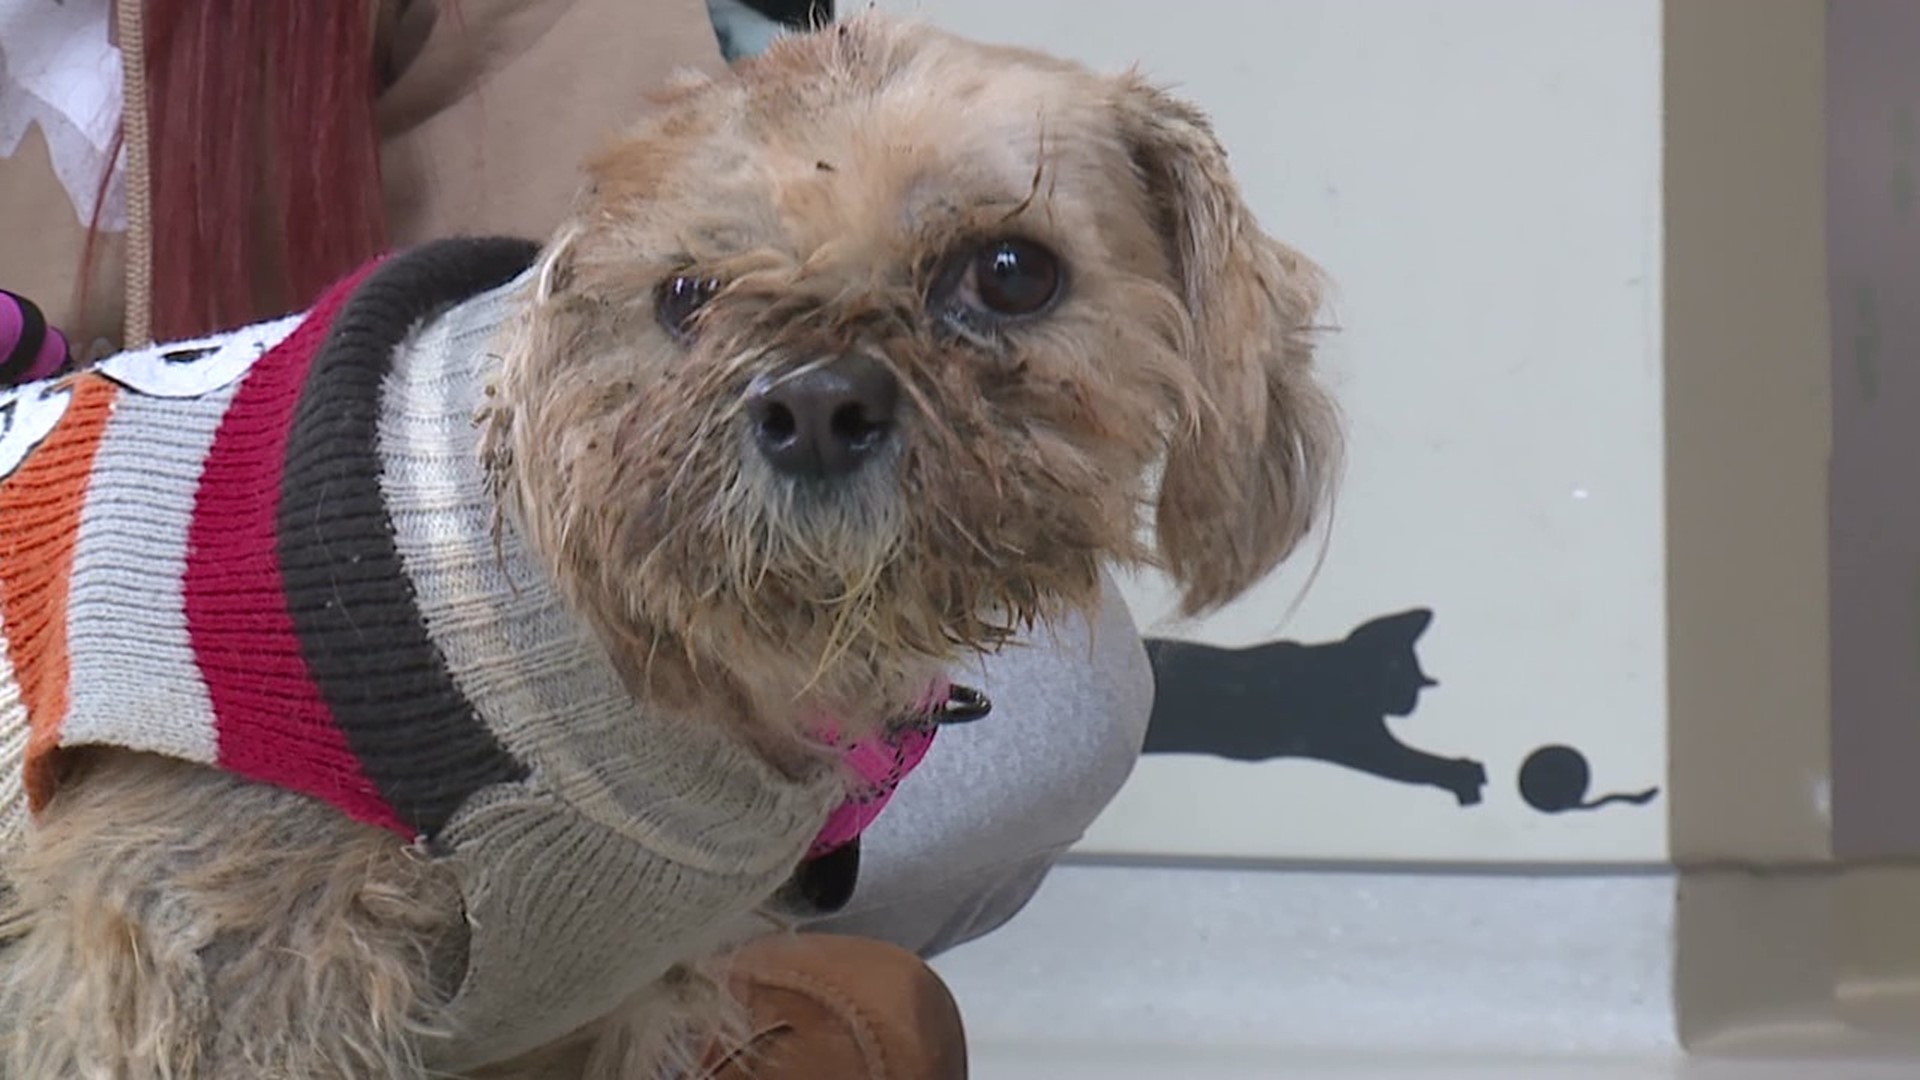 The staff at Griffin Pond Animal Shelter is looking for information after a man abandoned a dog outside the shelter after hours.